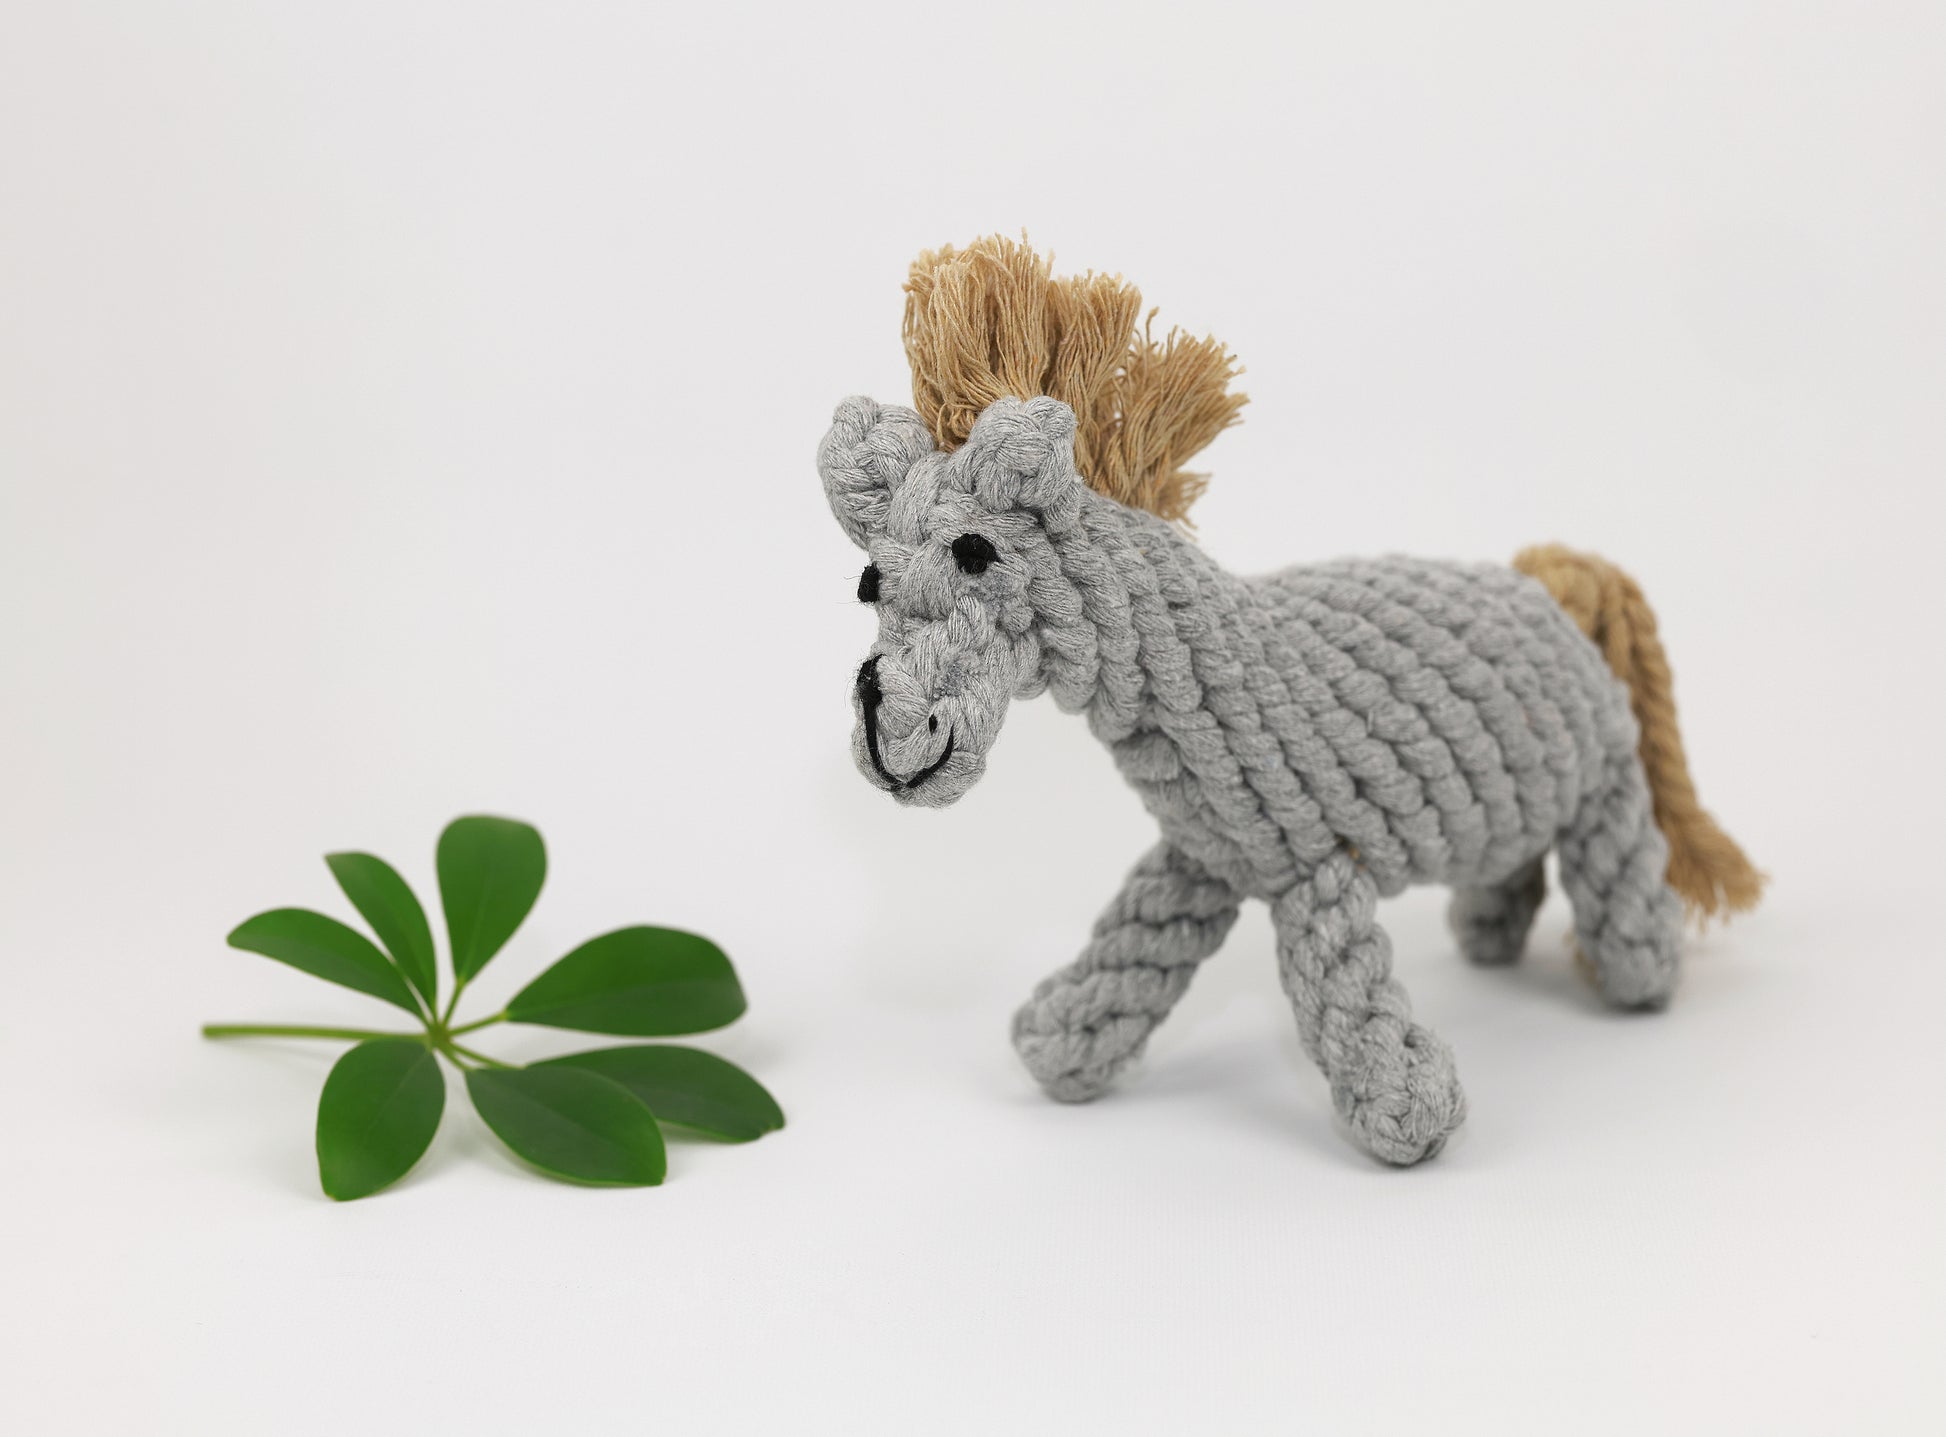 Gray horse cotton rope braided pet toy, perfect for your furry friends' playtime!